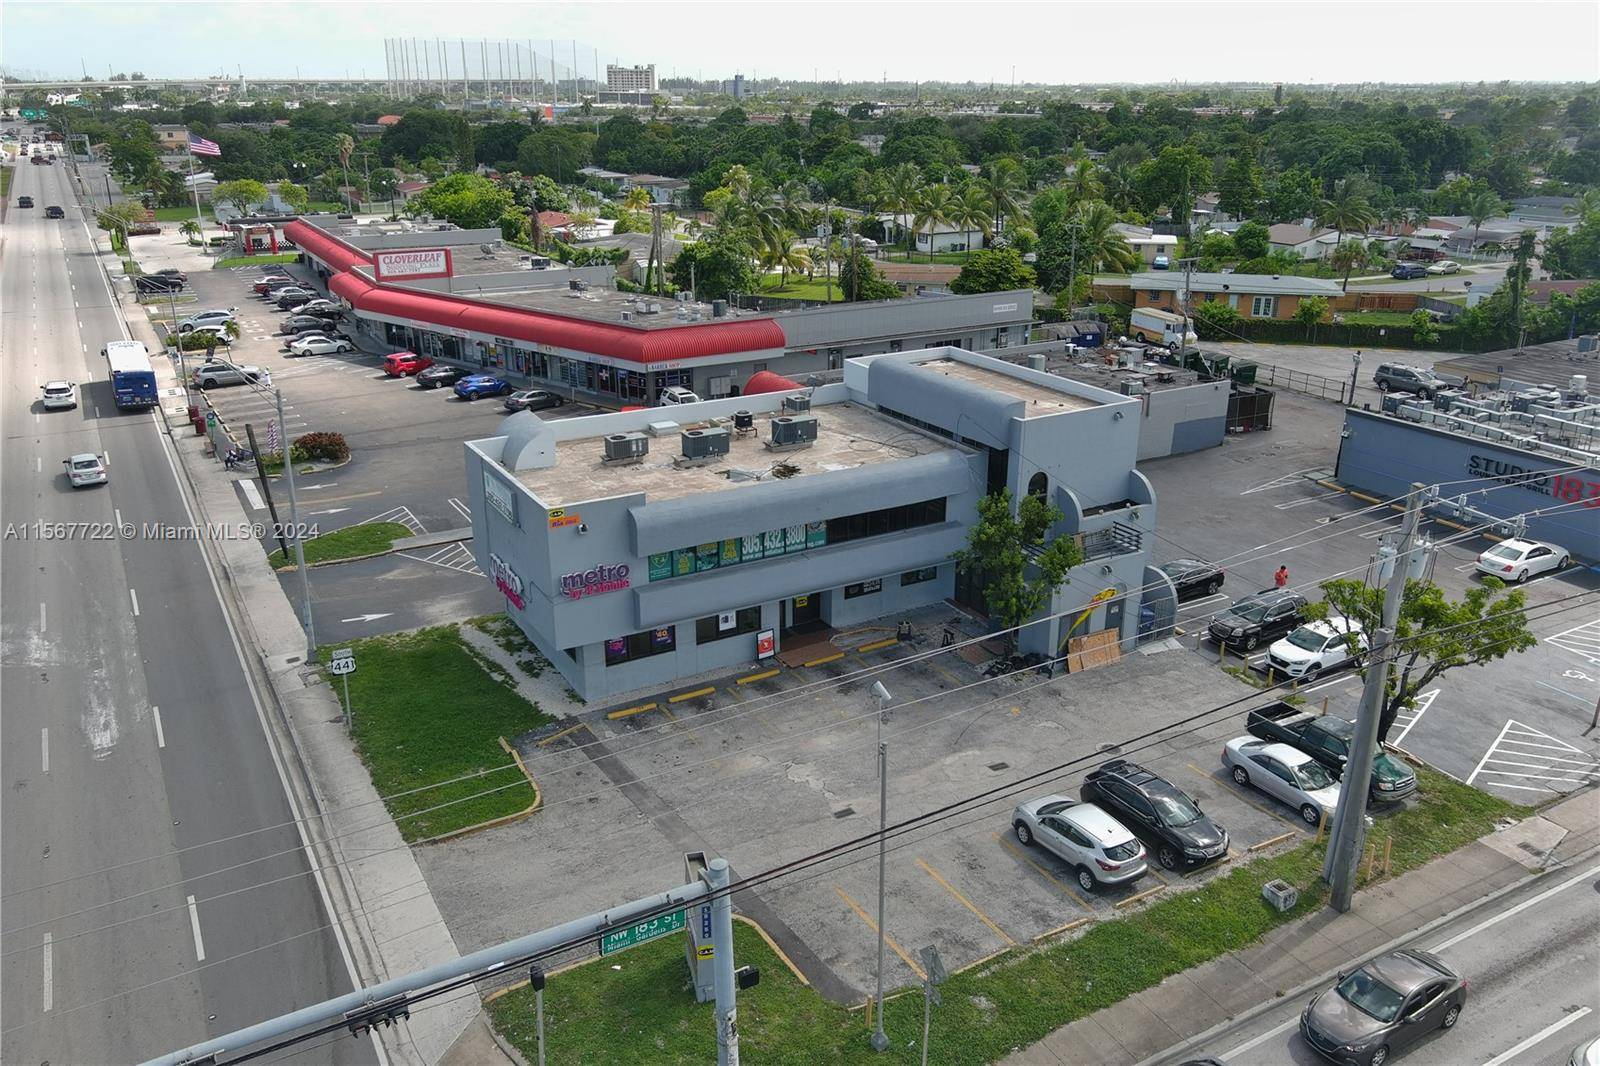 An investor s dream ! Located on one of the busiest corners in Miami Gardens, this building has infinite potential for big corporations that needs a corner location.